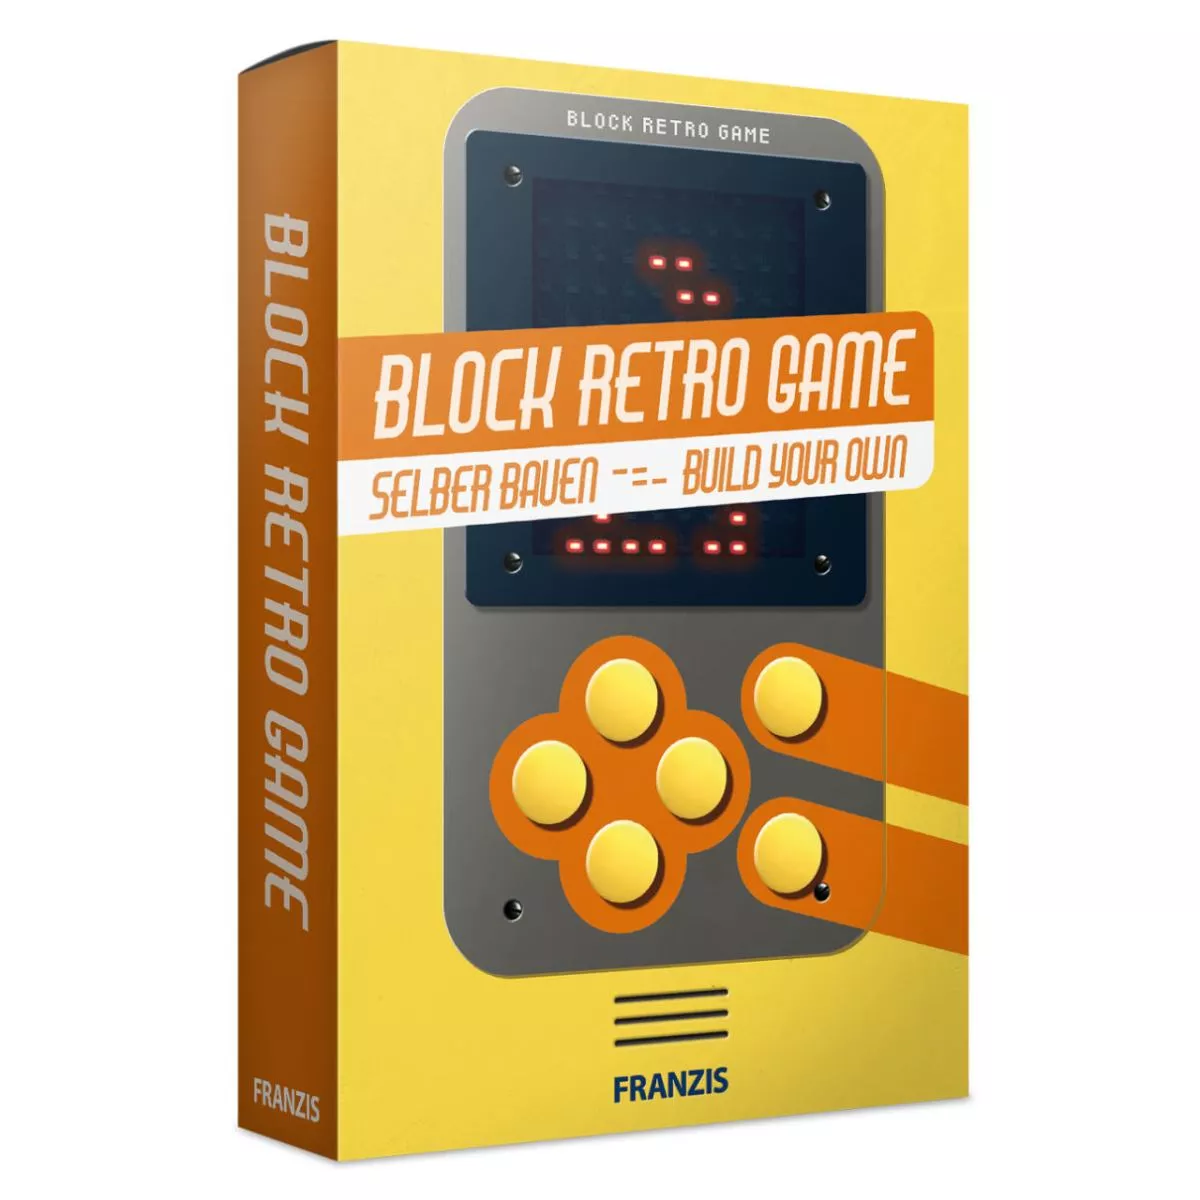 Electronic Retro Game "Block" as Kit for Self-Assembly